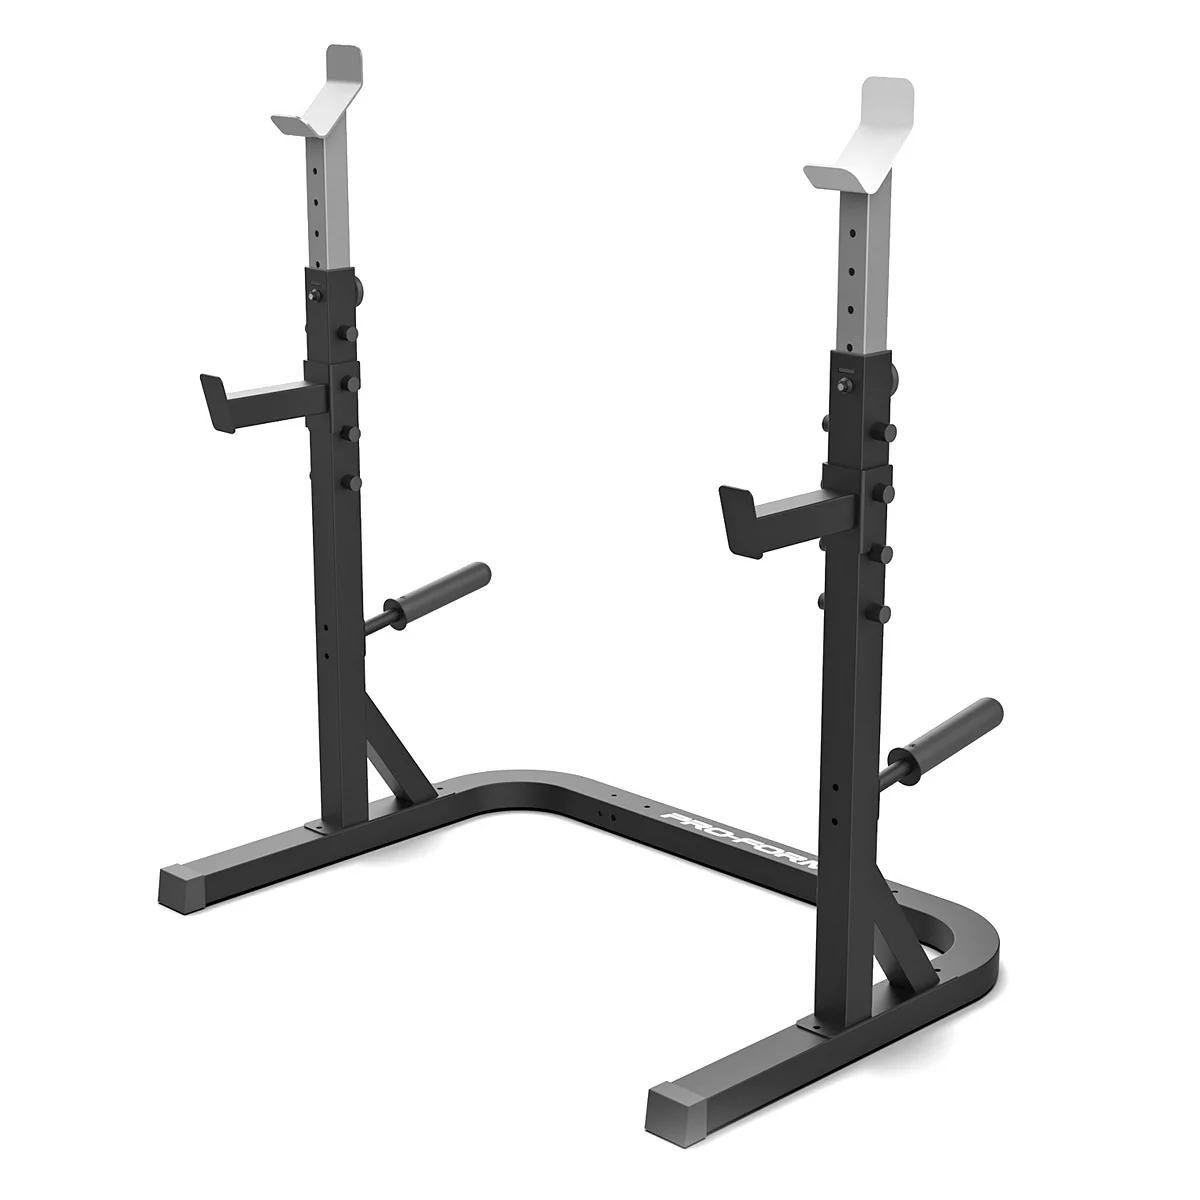 ProForm Sport Olympic Rack XT Home Gym with $20 Kohls Cash for $99.99 Shipped